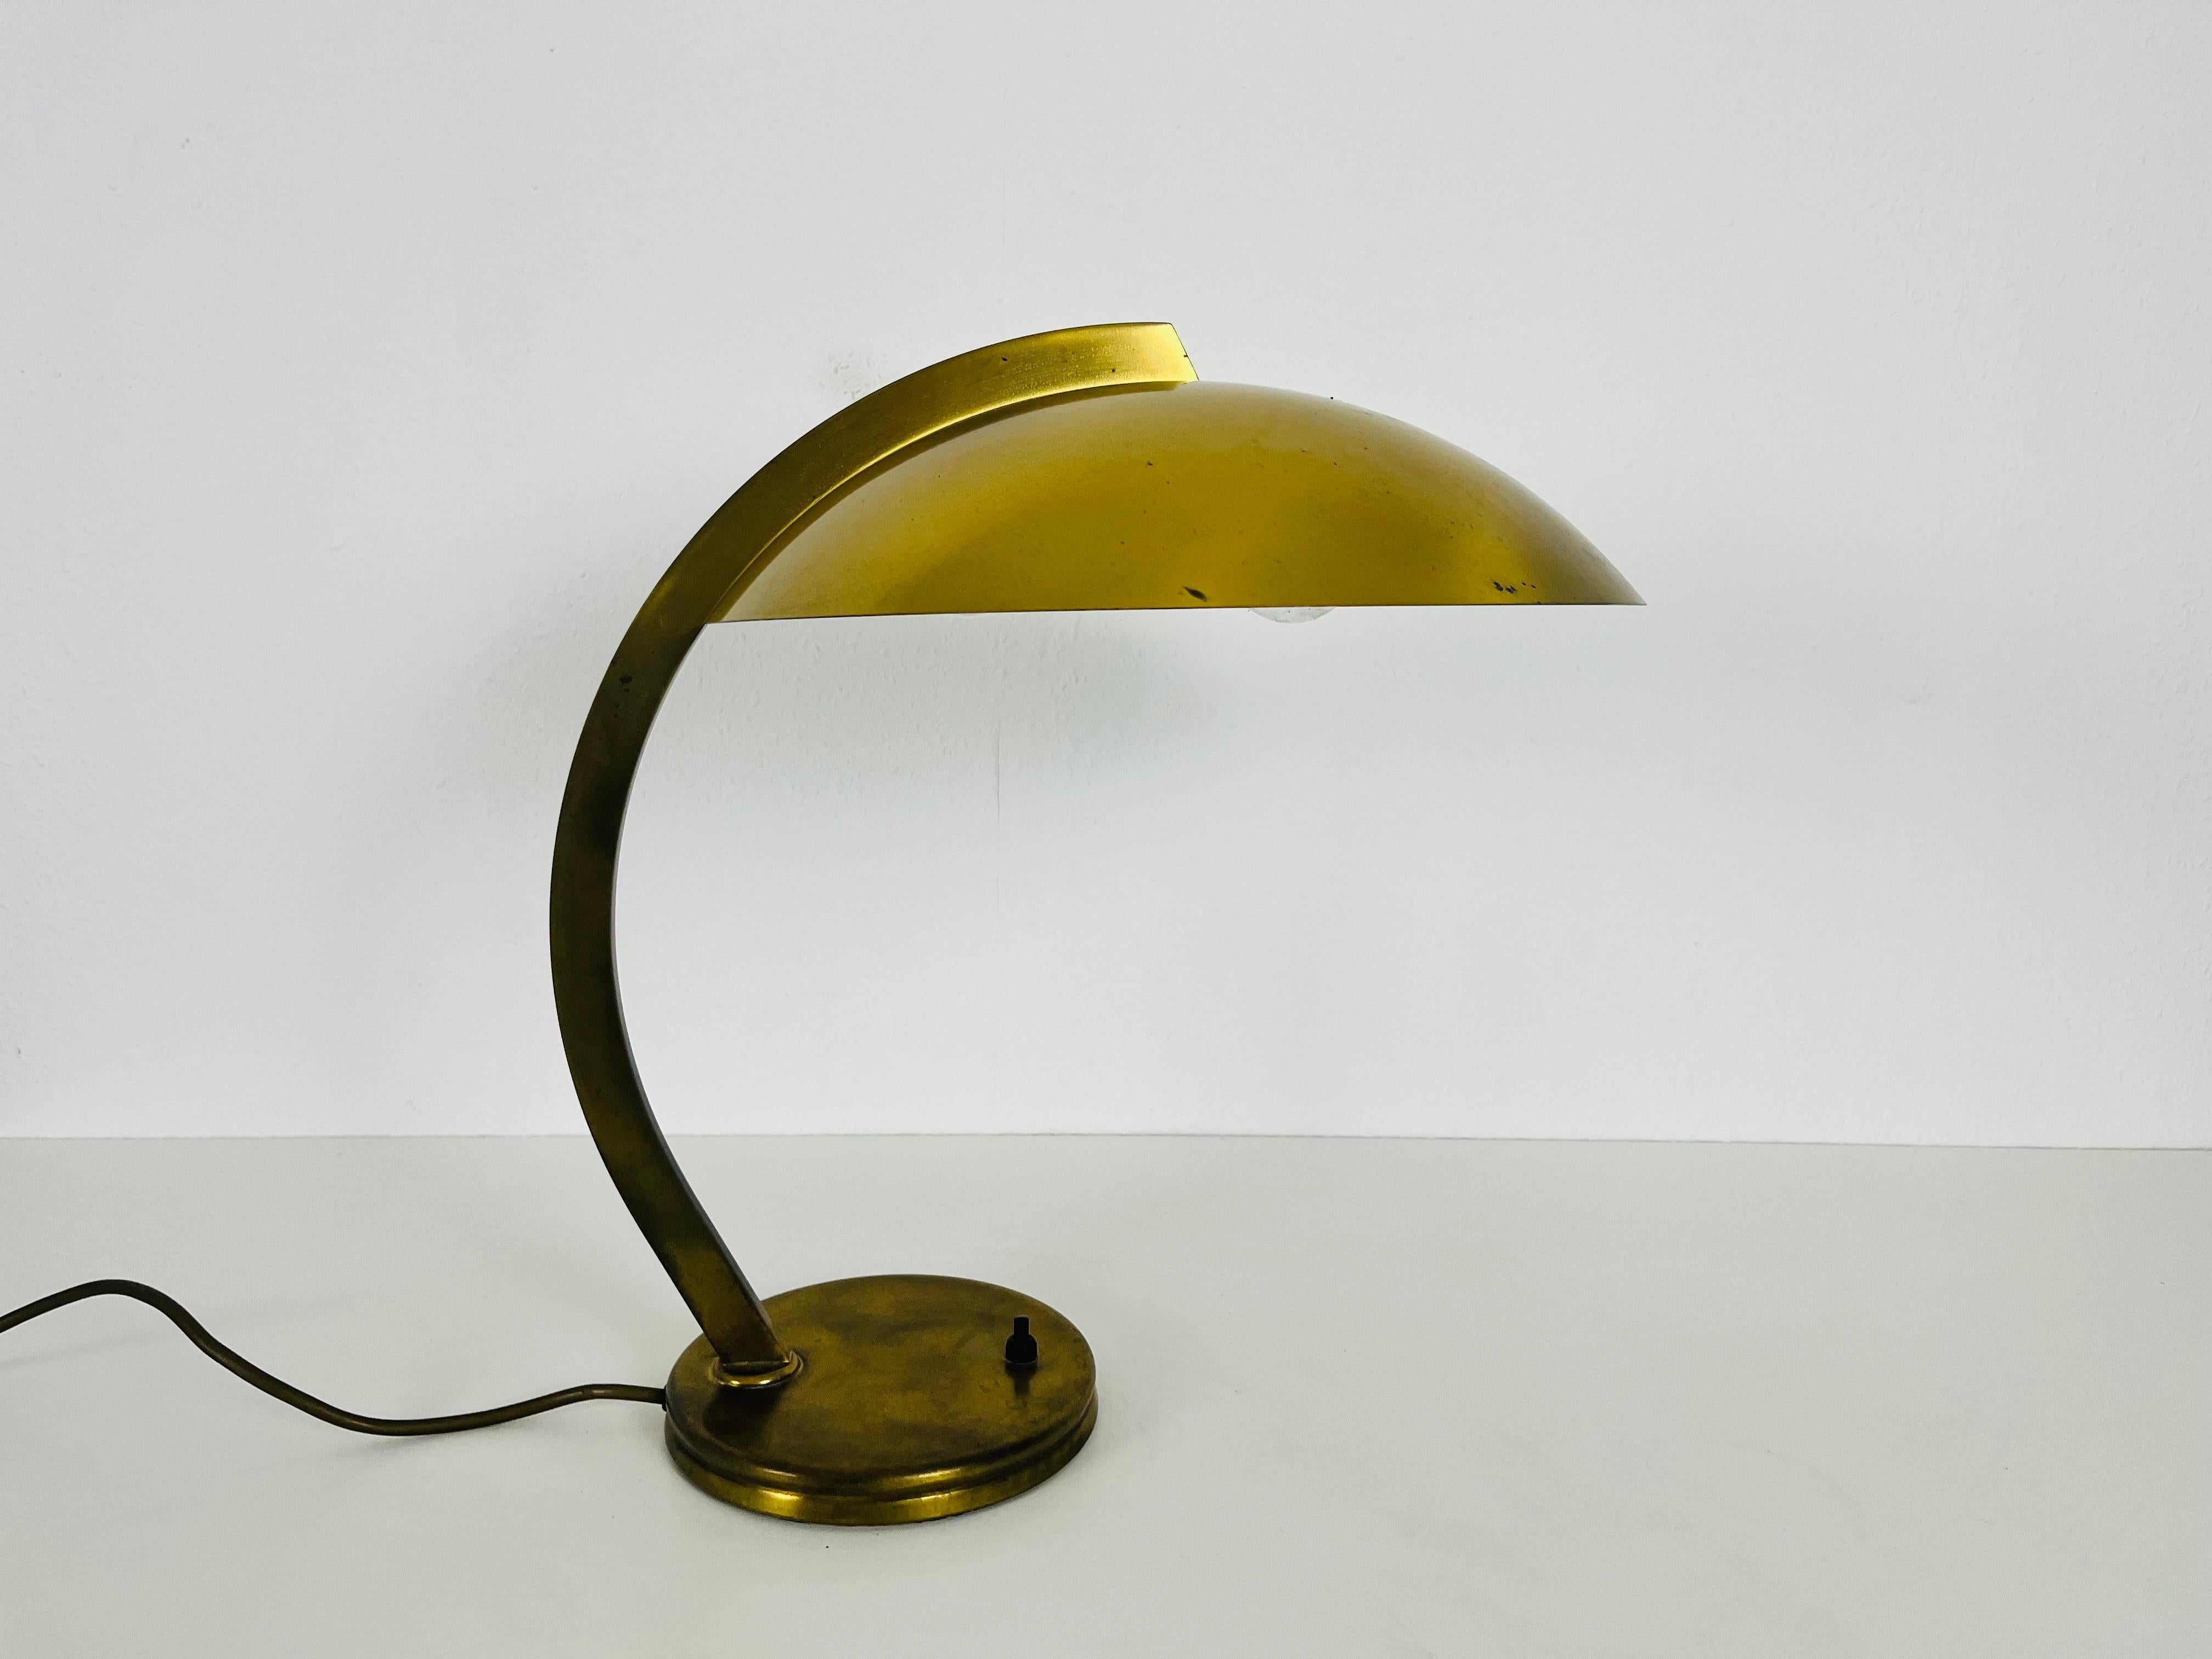 A Hillebrand table lamp made in Germany in the 1960s. Made of solid brass.

The light requires one E27 (US E26) light bulb. Works with both 220V/120V. Good vintage condition.

Free worldwide express shipping.